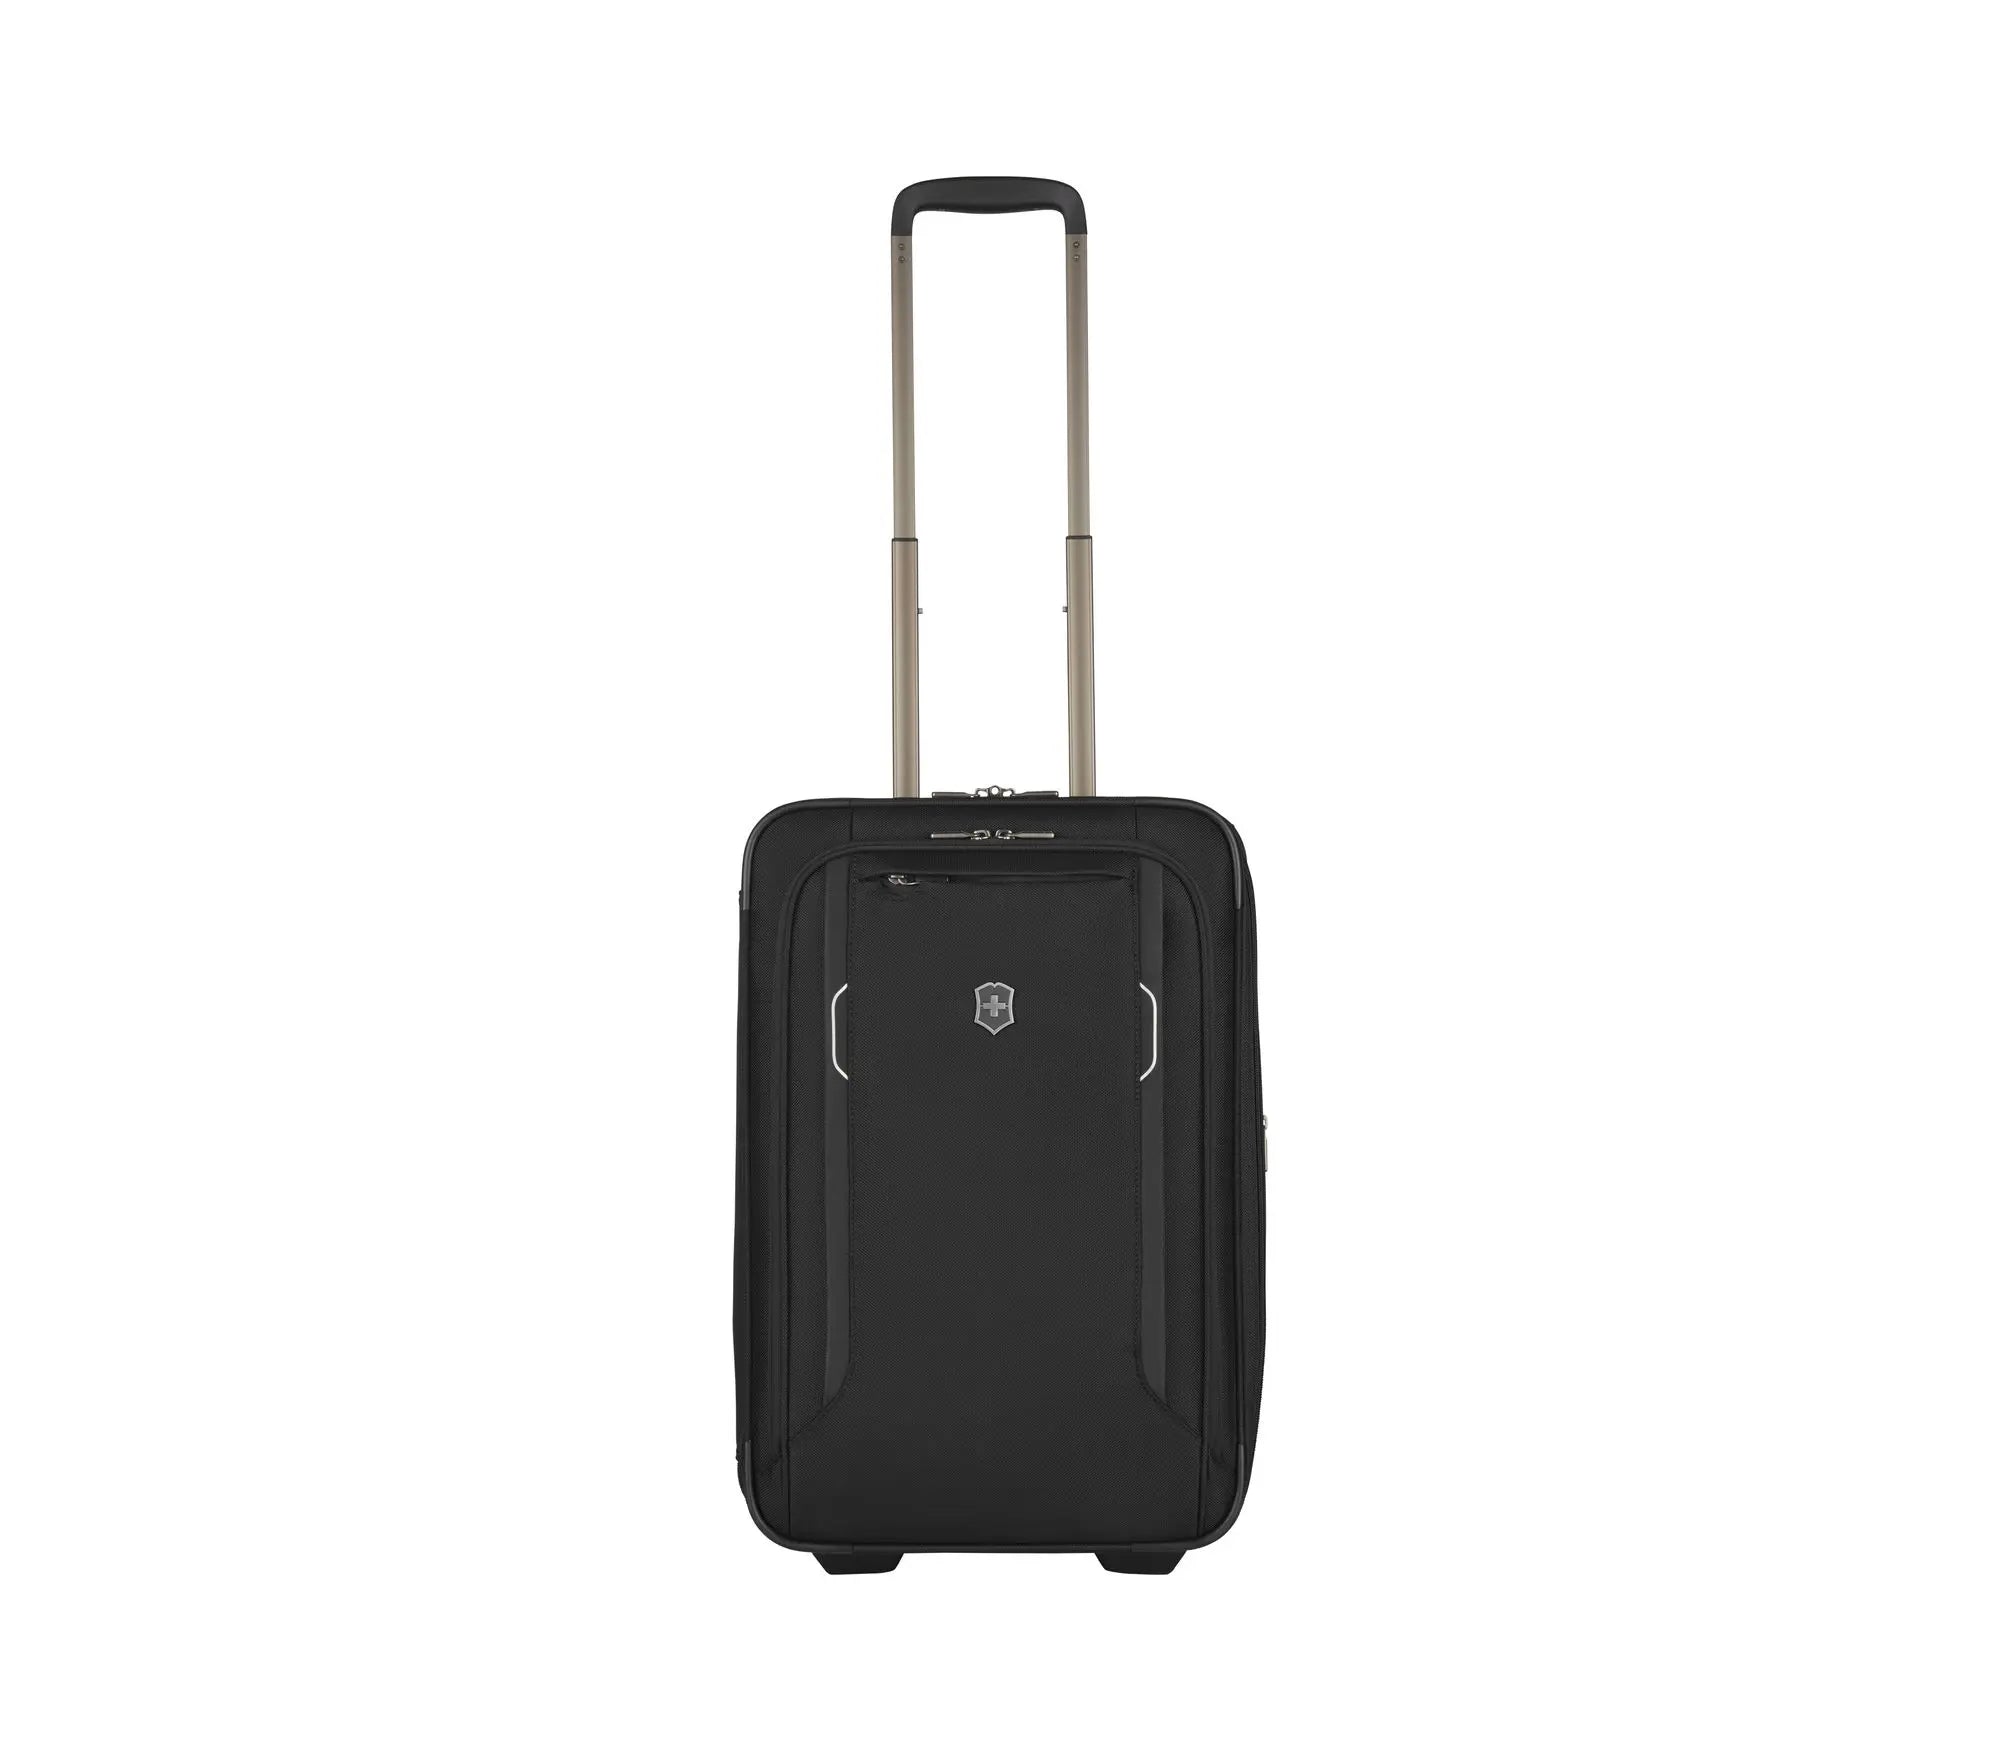 Werks Traveler 6.0 2-Wheel Frequent Flyer Softside Carry-On 22" - Voyage Luggage